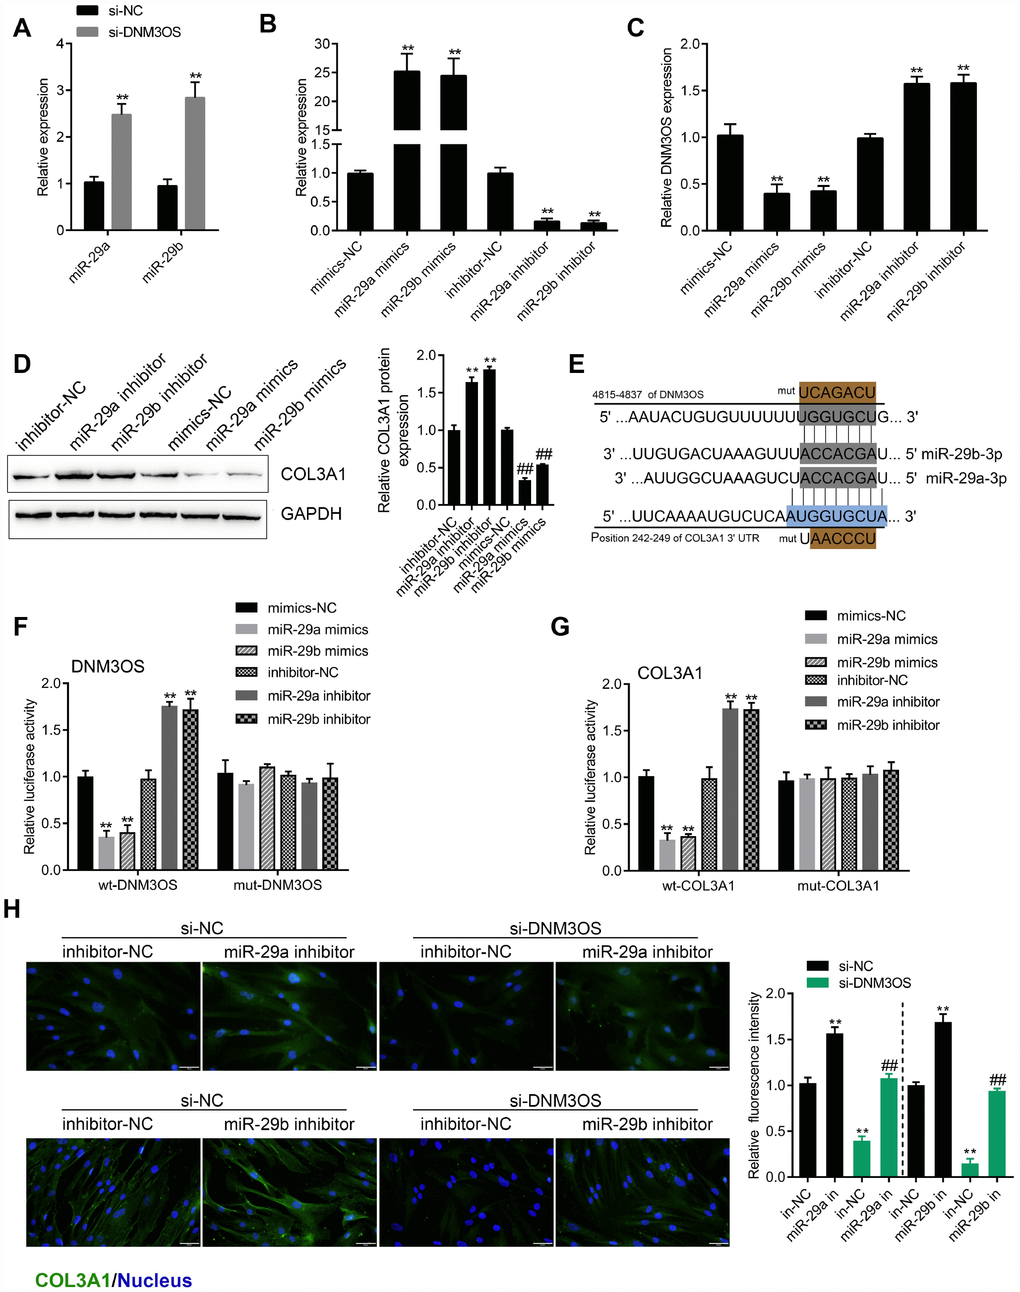 miR-29a and miR-29b directly bind the DNM3OS and COL3A1 3'UTR to negatively regulate their expression (A) PrSCs were transfected with si-DNM3OS and examined for the expression of miR-29a/29b by real-time PCR. (B) miR-29a/29b overexpression or inhibition conducted in PrSCs by transfection of miR-29a/29b mimics or inhibitor and confirmed by real-time PCR. (C) PrSCs were transfected with miR-29a/29b mimics or inhibitor and examined for the expression of DNM3OS by real-time PCR. (D) PrSCs were transfected with miR-29a/29b mimics or inhibitor and examined for the protein levels of COL3A1. (E) A schematic diagram showing the predicted binding sites between miR-29a/29b and DNM3OS or COL3A1. Wild- and mutant-type DNM3OS or COL3A1 3'UTR luciferase reporter vectors were constructed. Mutant-type vectors contained a 7-bp mutation in the predicted miR-29a/29b binding site. (F–G) 293T cells were cotransfected with these vectors and miR-29a/29b mimics or inhibitor and examined for luciferase activity. (H) PrSCs were cotransfected with si-DNM3OS and miR-29a/29b inhibitor and examined for the protein content and distribution of COL3A1 by IF staining (scale bar: 50 μM). **P